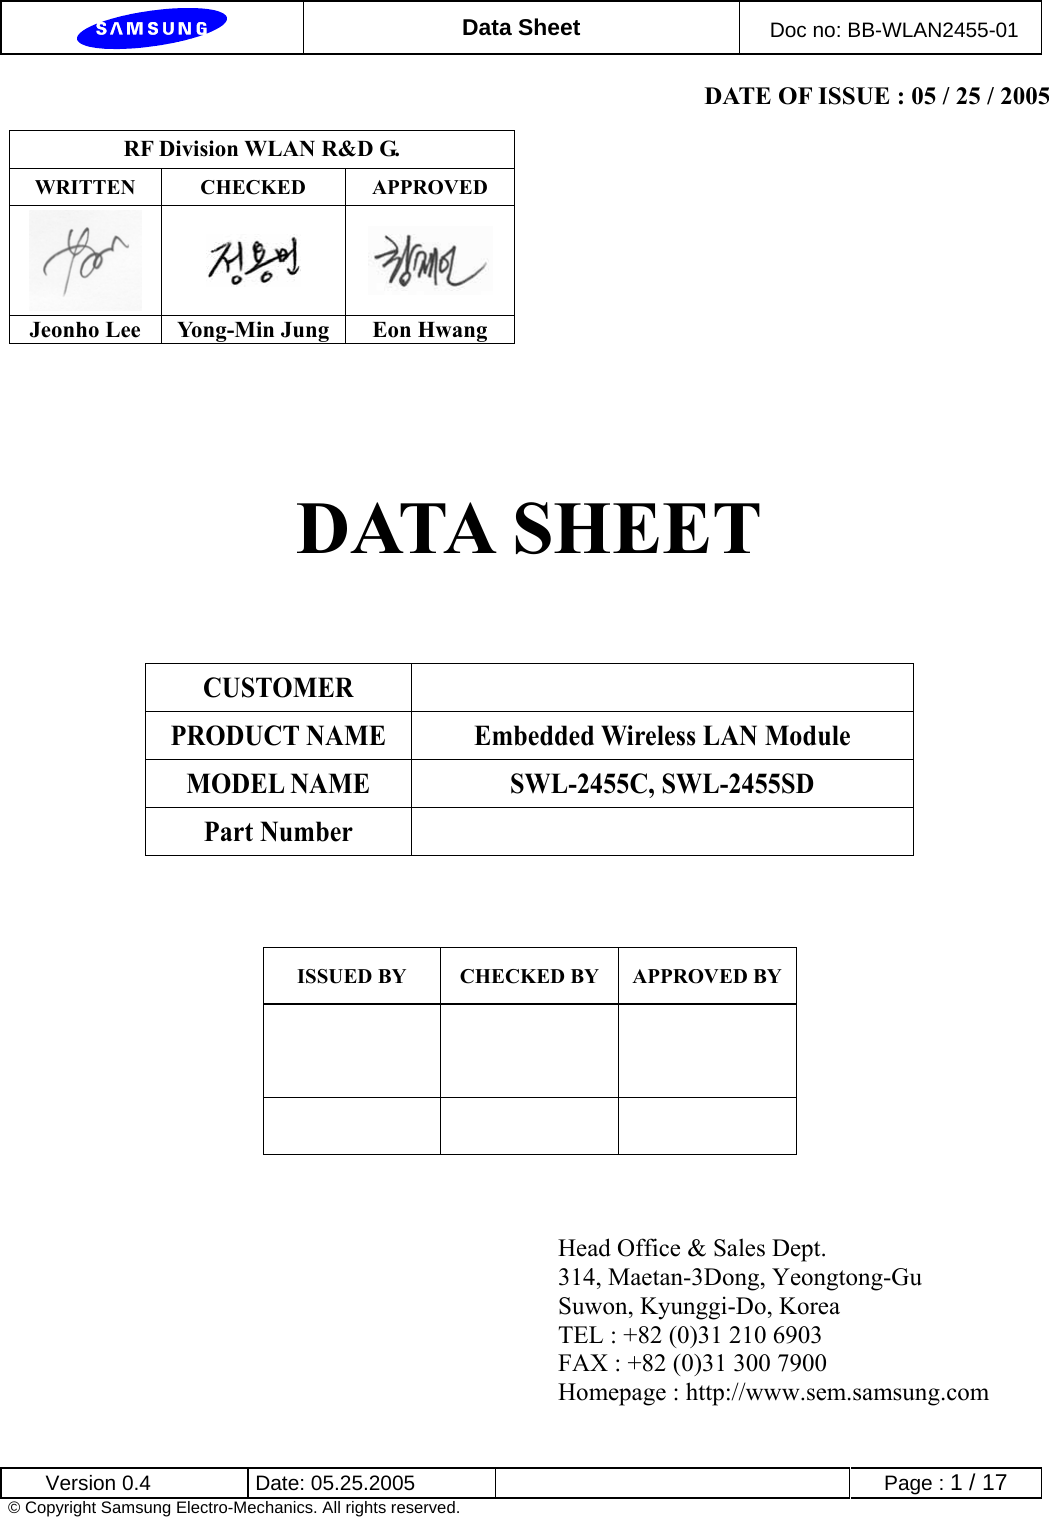  Data Sheet  Doc no: BB-WLAN2455-01  Version 0.4  Date: 05.25.2005      Page : 1 / 17 © Copyright Samsung Electro-Mechanics. All rights reserved. DATE OF ISSUE : 05 / 25 / 2005    DATA SHEET                        RF Division WLAN R&amp;D G. WRITTEN CHECKED APPROVED    Jeonho Lee  Yong-Min Jung  Eon Hwang CUSTOMER  PRODUCT NAME  Embedded Wireless LAN Module MODEL NAME  SWL-2455C, SWL-2455SD Part Number   ISSUED BY  CHECKED BY  APPROVED BY       Head Office &amp; Sales Dept. 314, Maetan-3Dong, Yeongtong-Gu Suwon, Kyunggi-Do, Korea TEL : +82 (0)31 210 6903   FAX : +82 (0)31 300 7900 Homepage : http://www.sem.samsung.com 